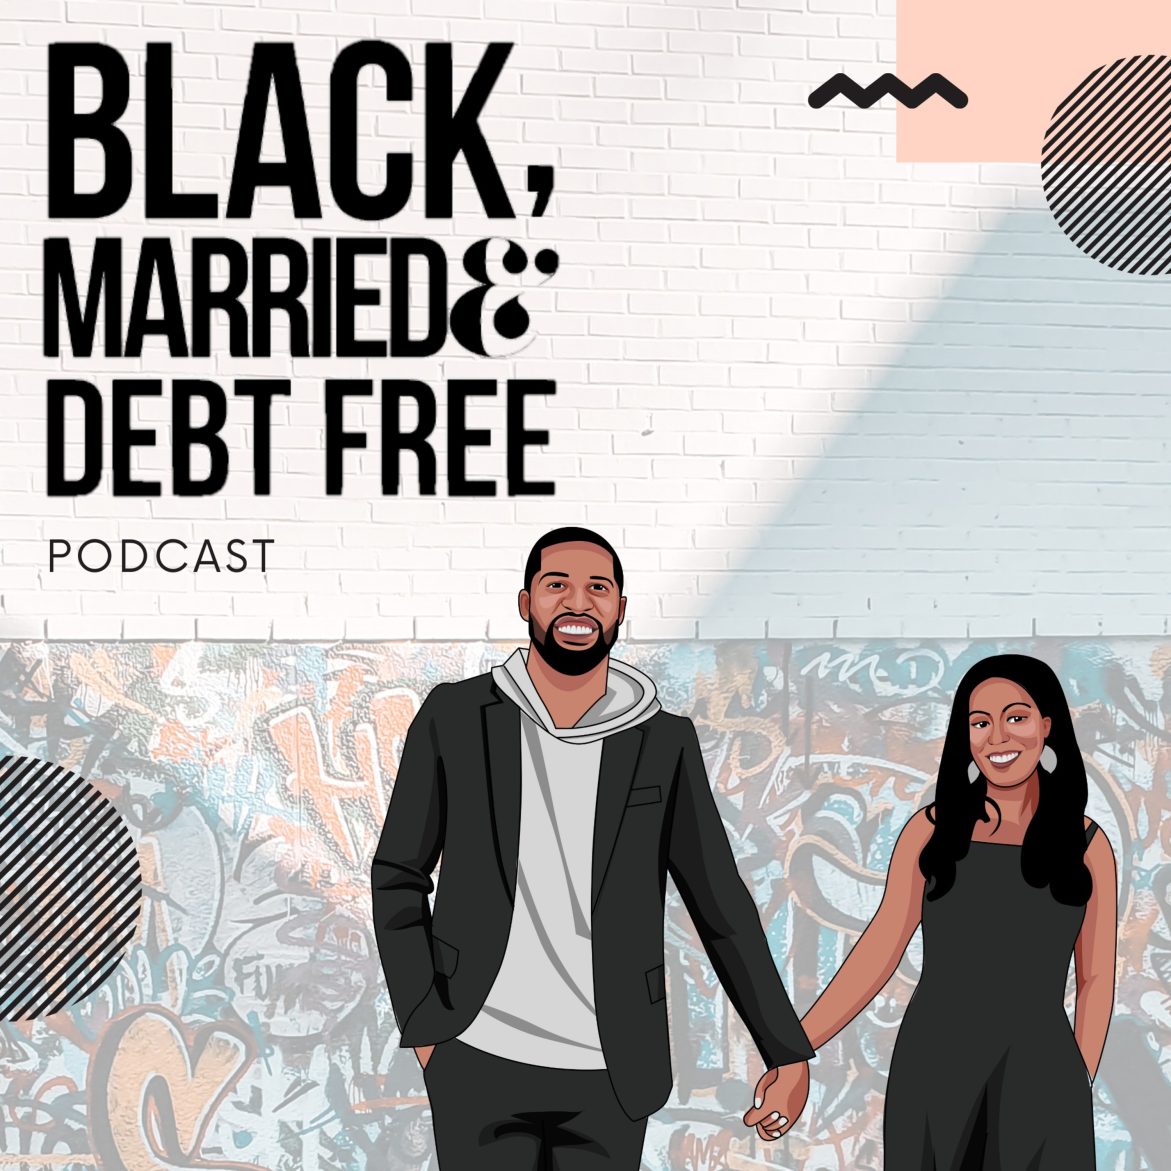 Black Podcasting - (EP - 288 NO MUSIC) 8 FINANCIAL PLANNERS GIVE ADVICE ON SURVIVING TODAY'S ECONOMY | DO WE AGREE? 🤔